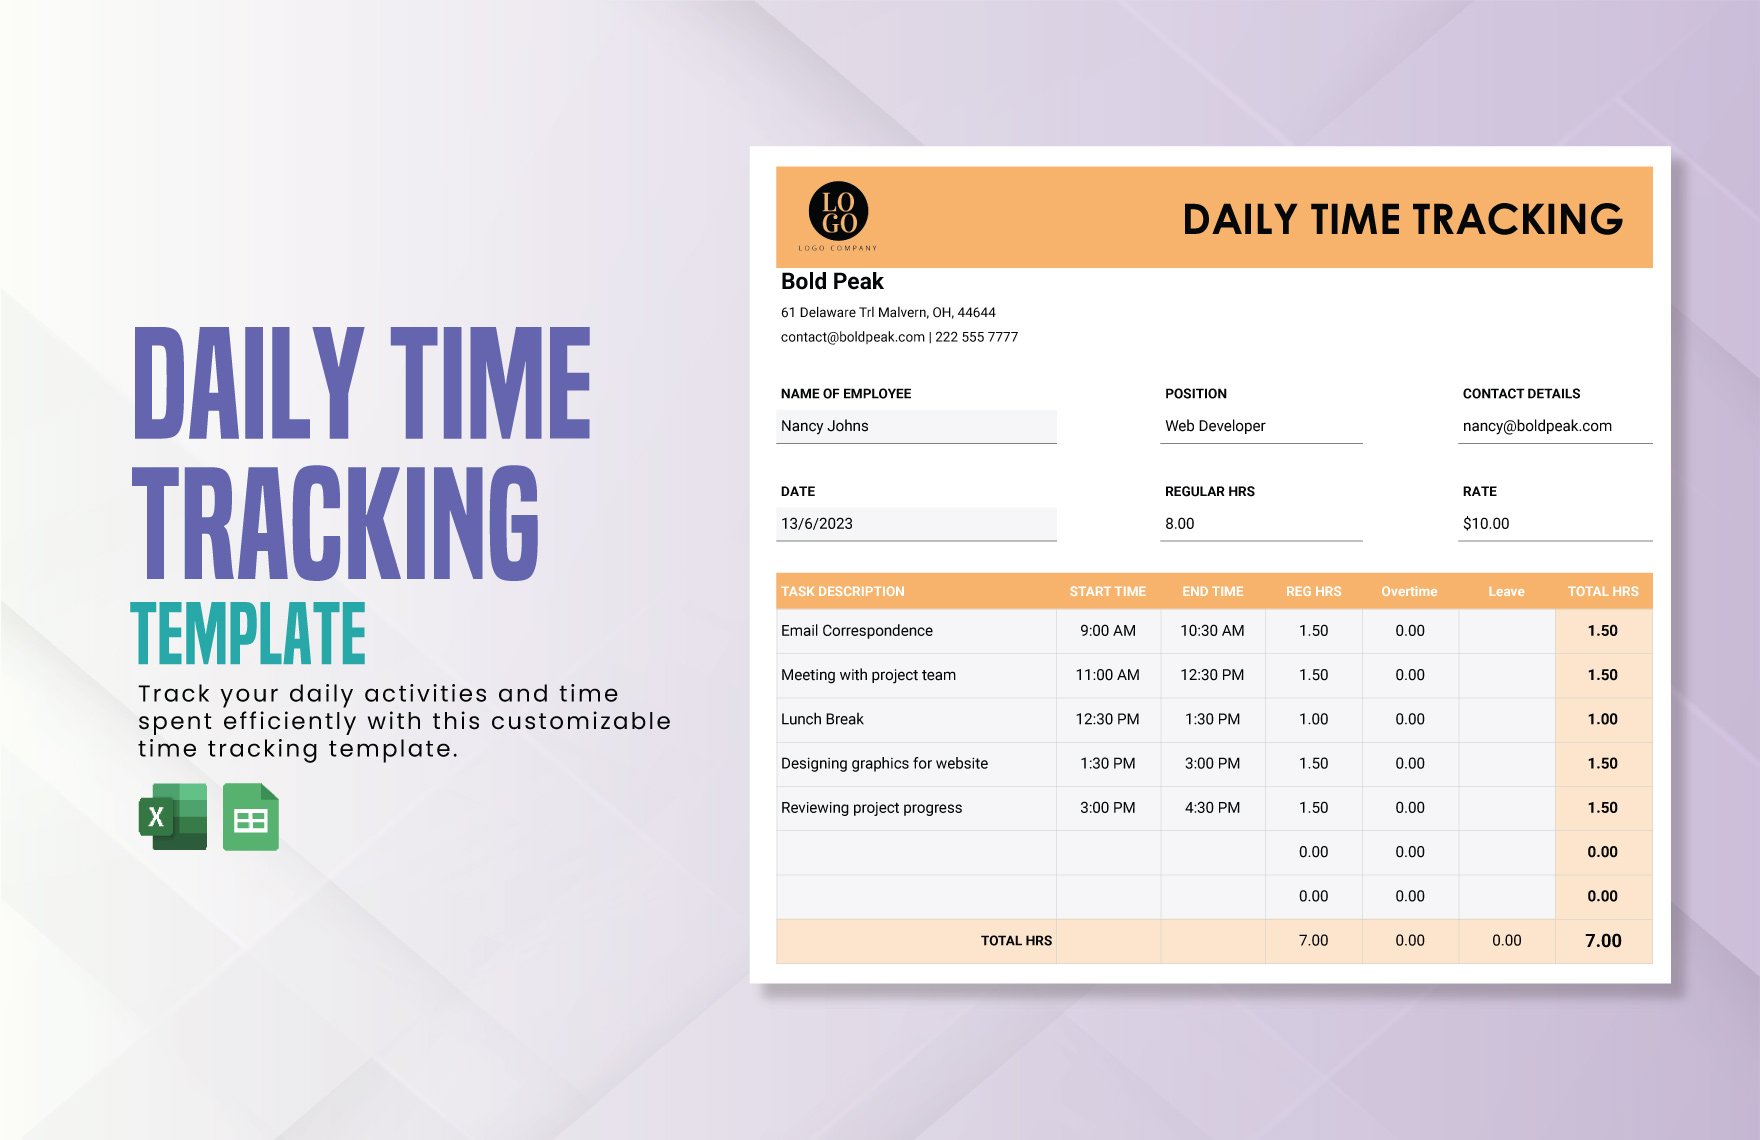 Free Daily Time Tracking Template in Excel, Google Sheets